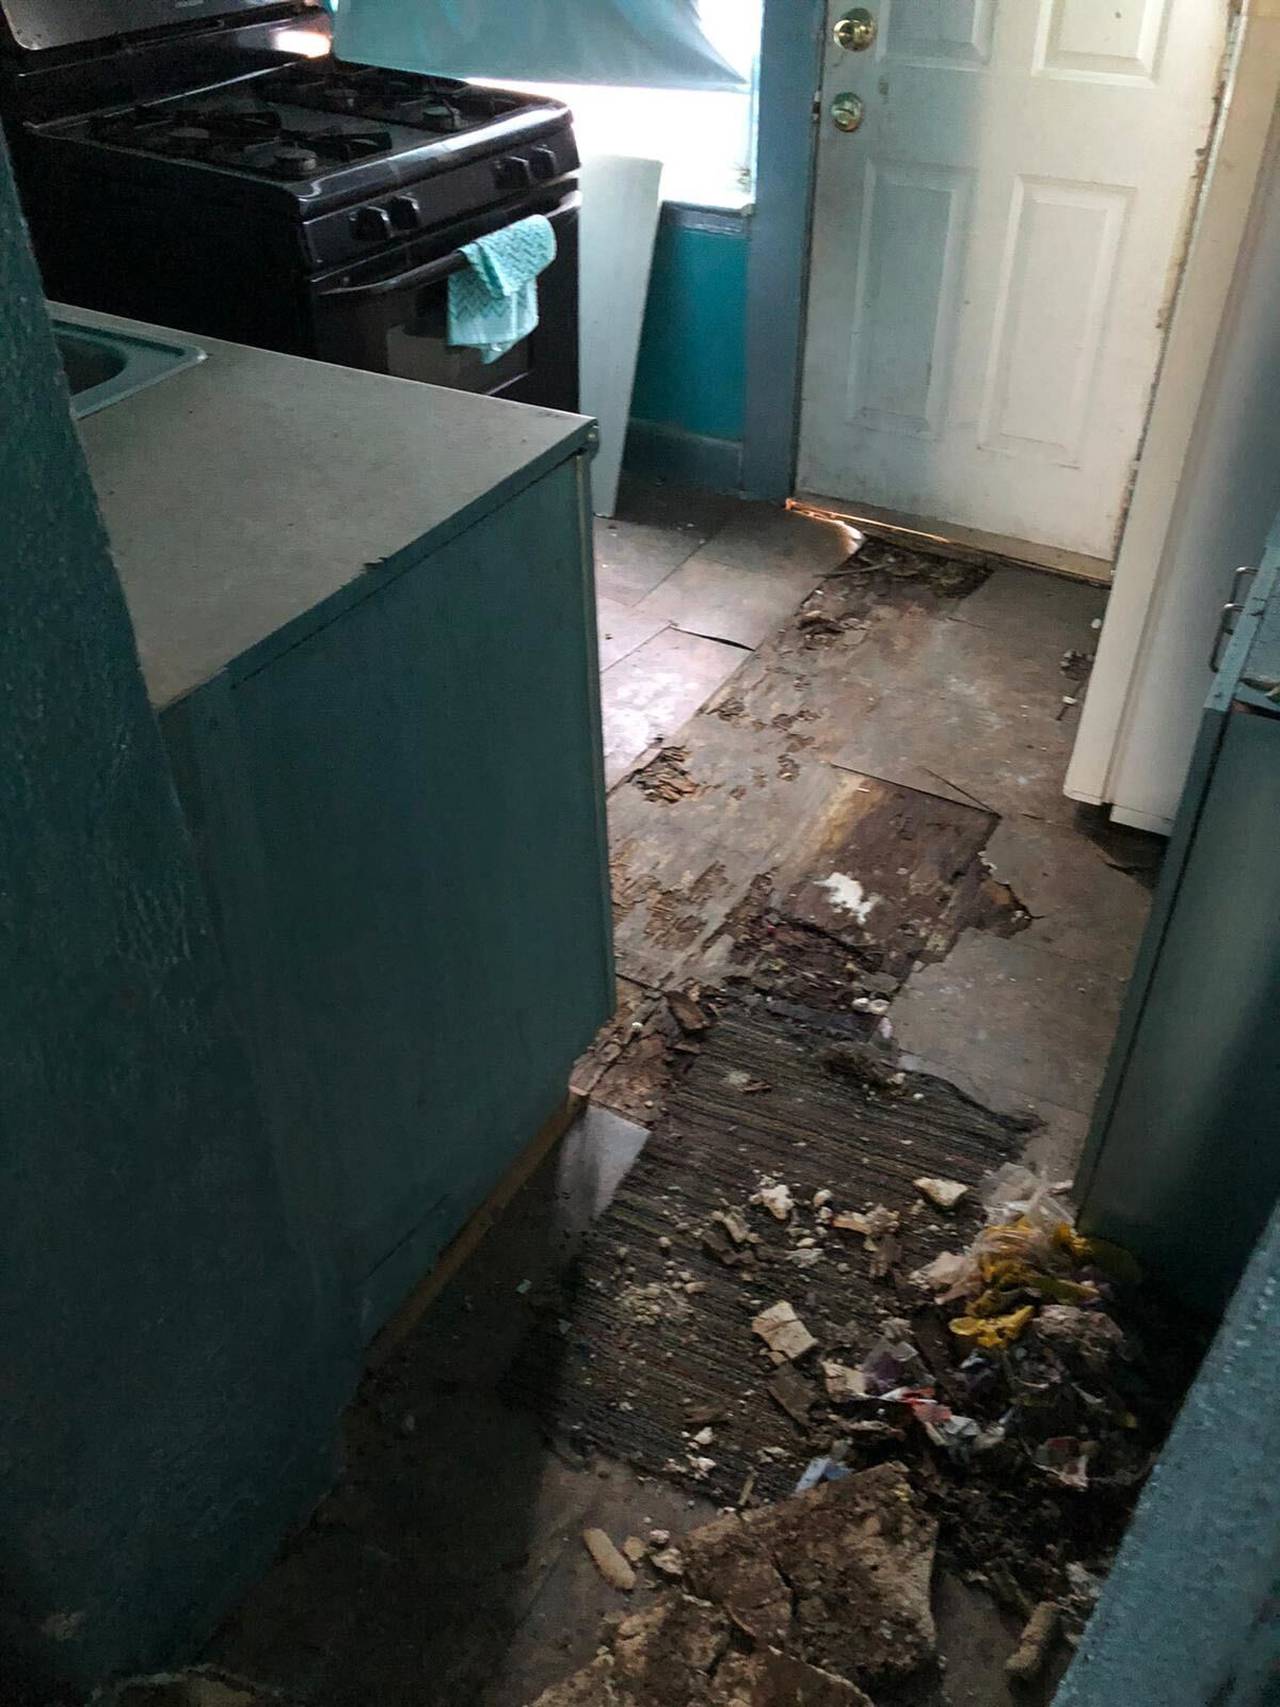 A Turkish pilot travelled to Baltimore to inspect a home he purchased through Property Invest USA, which he believed was being rented out. The interior was in disrepair.